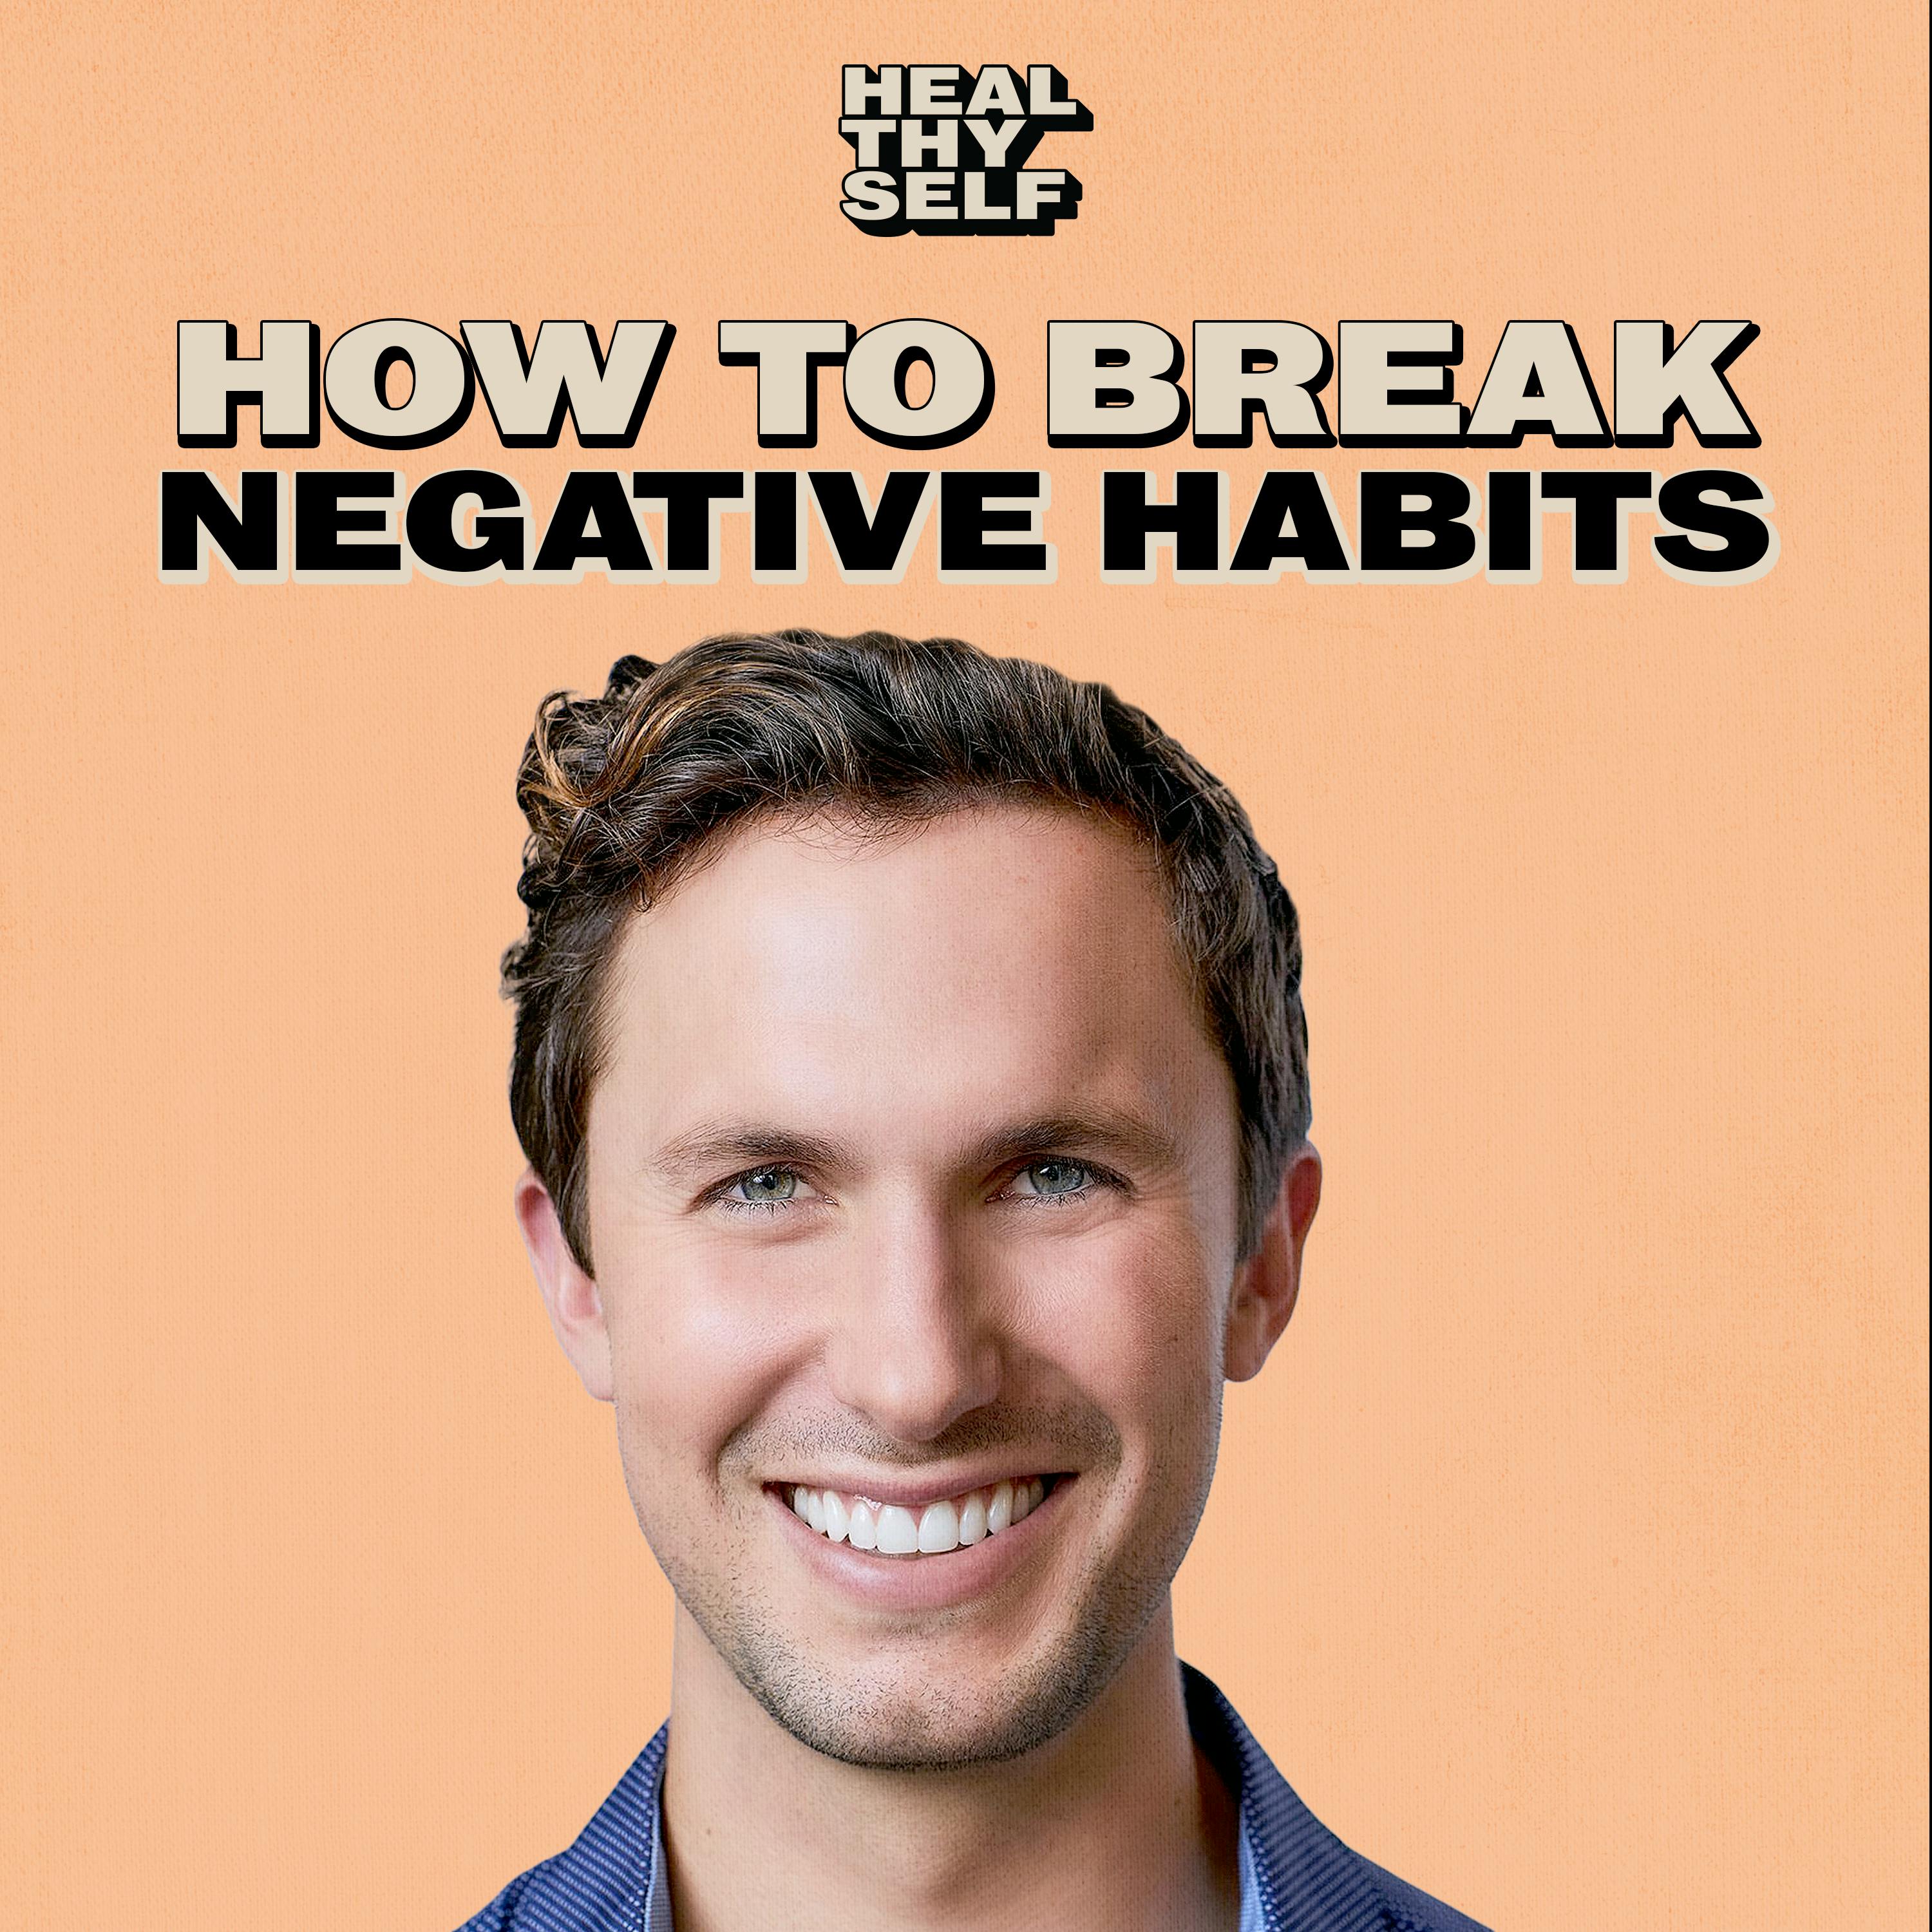 How to avoid burnout and tips to transform your habits with David Nurse